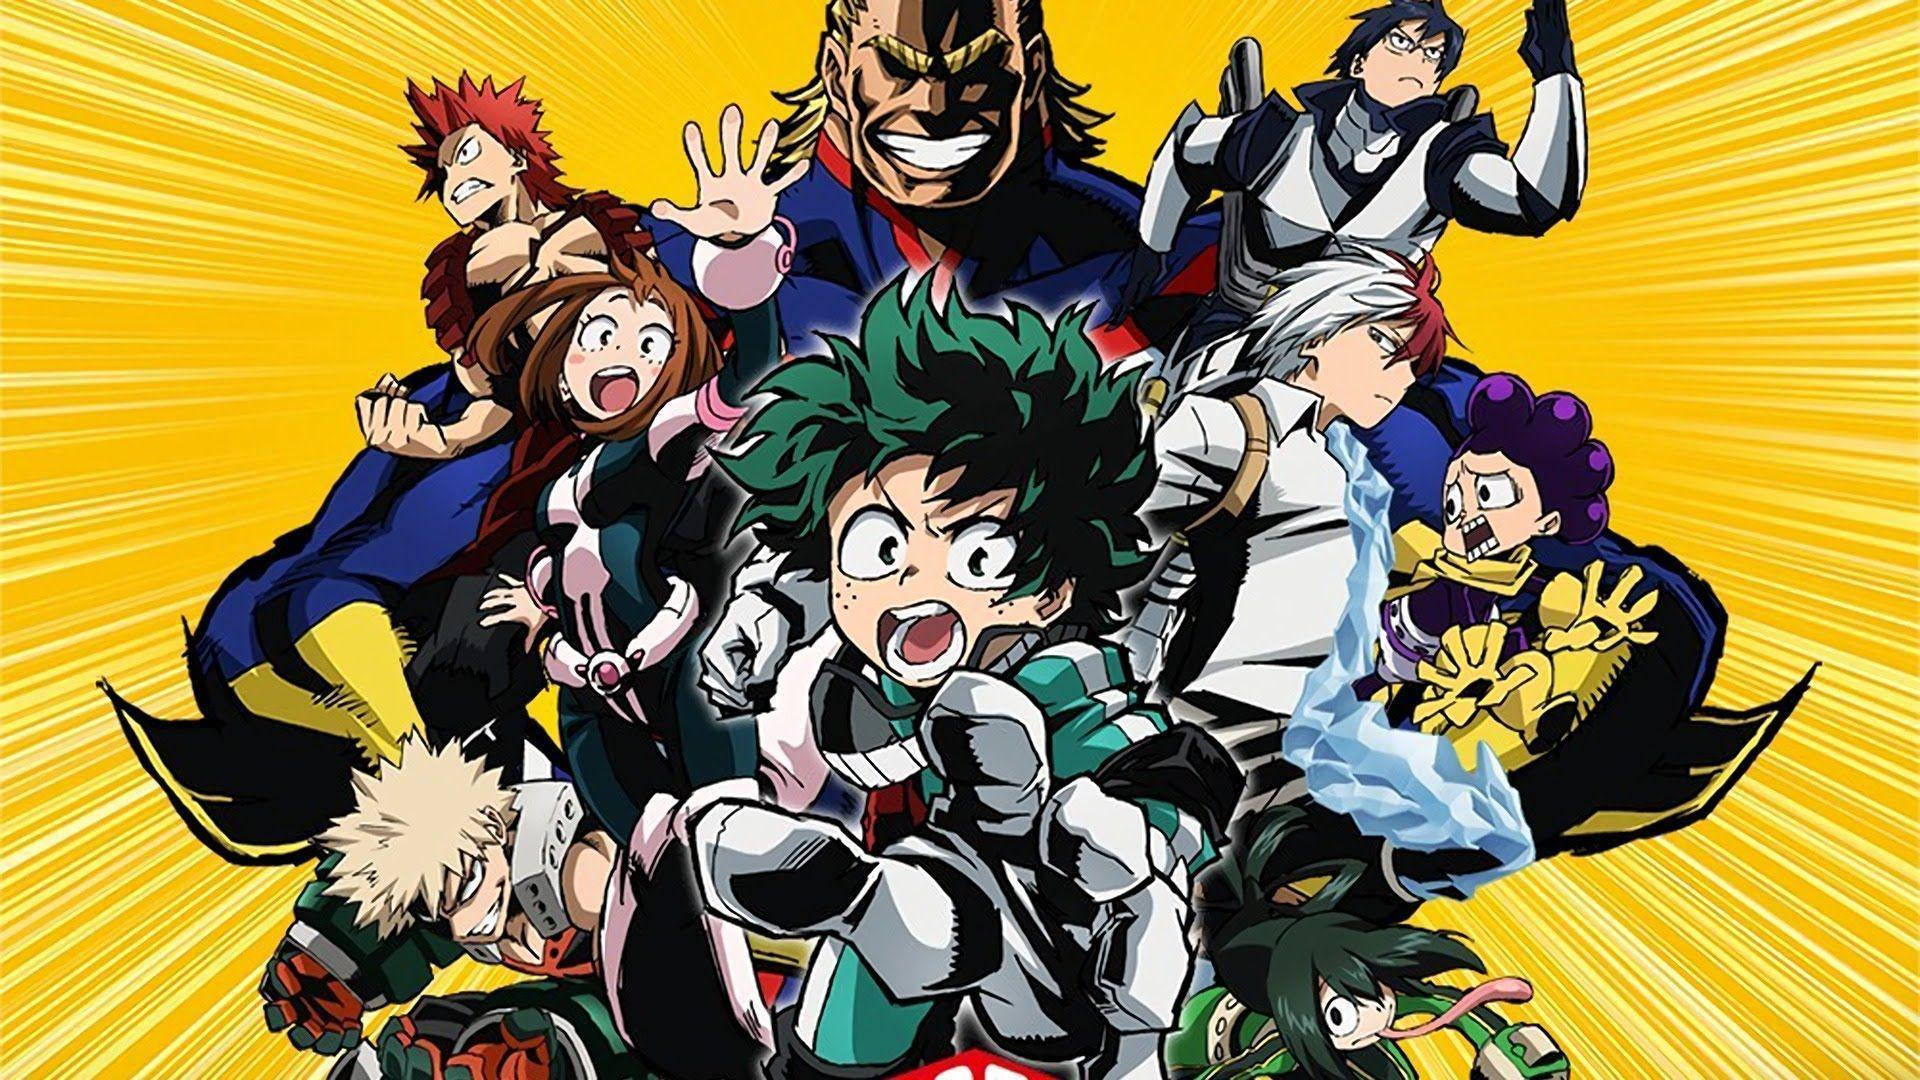 Bnha Ready-to-fight Heroes Background